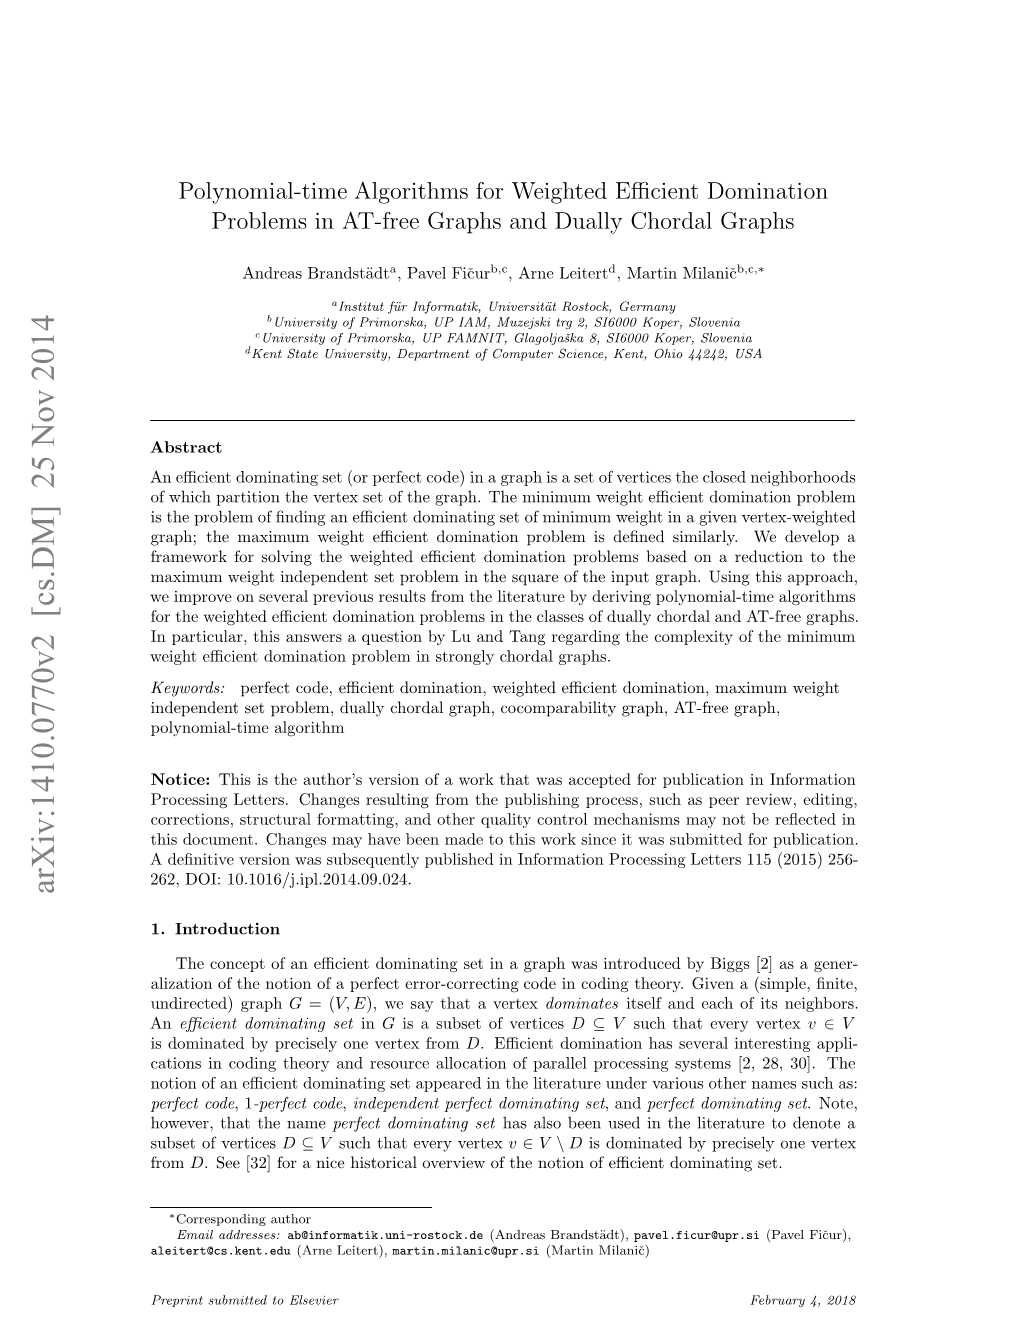 Polynomial-Time Algorithms for Weighted Efficient Domination Problems in AT-Free Graphs and Dually Chordal Graphs